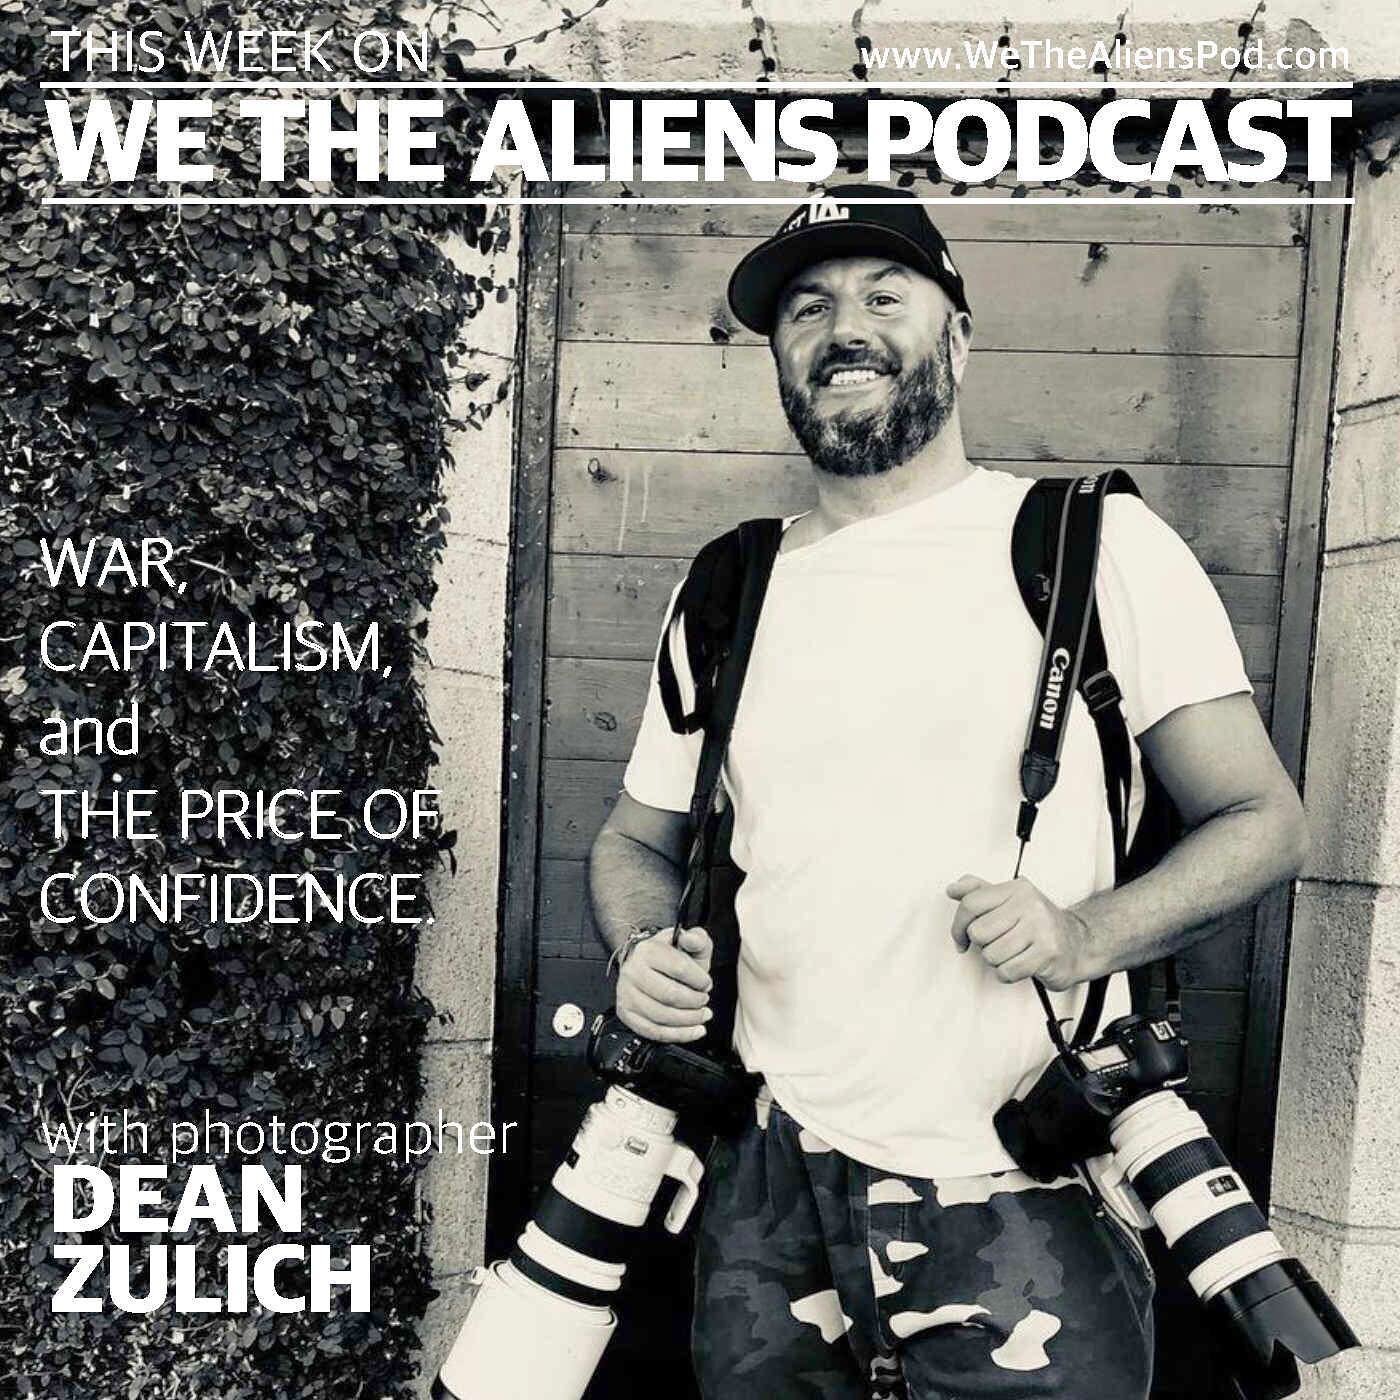 ✊ THE UNSHAKEABLE CONFIDENCE ✊
.
Dean Zulich is a rockstar photographer. Among his clients are @nike , @unitednations, @playboy, and @ESPN.
.
His work has appeared in @voguemagazine, @nytimes, @bostonglobe, and many other publications. He has travele